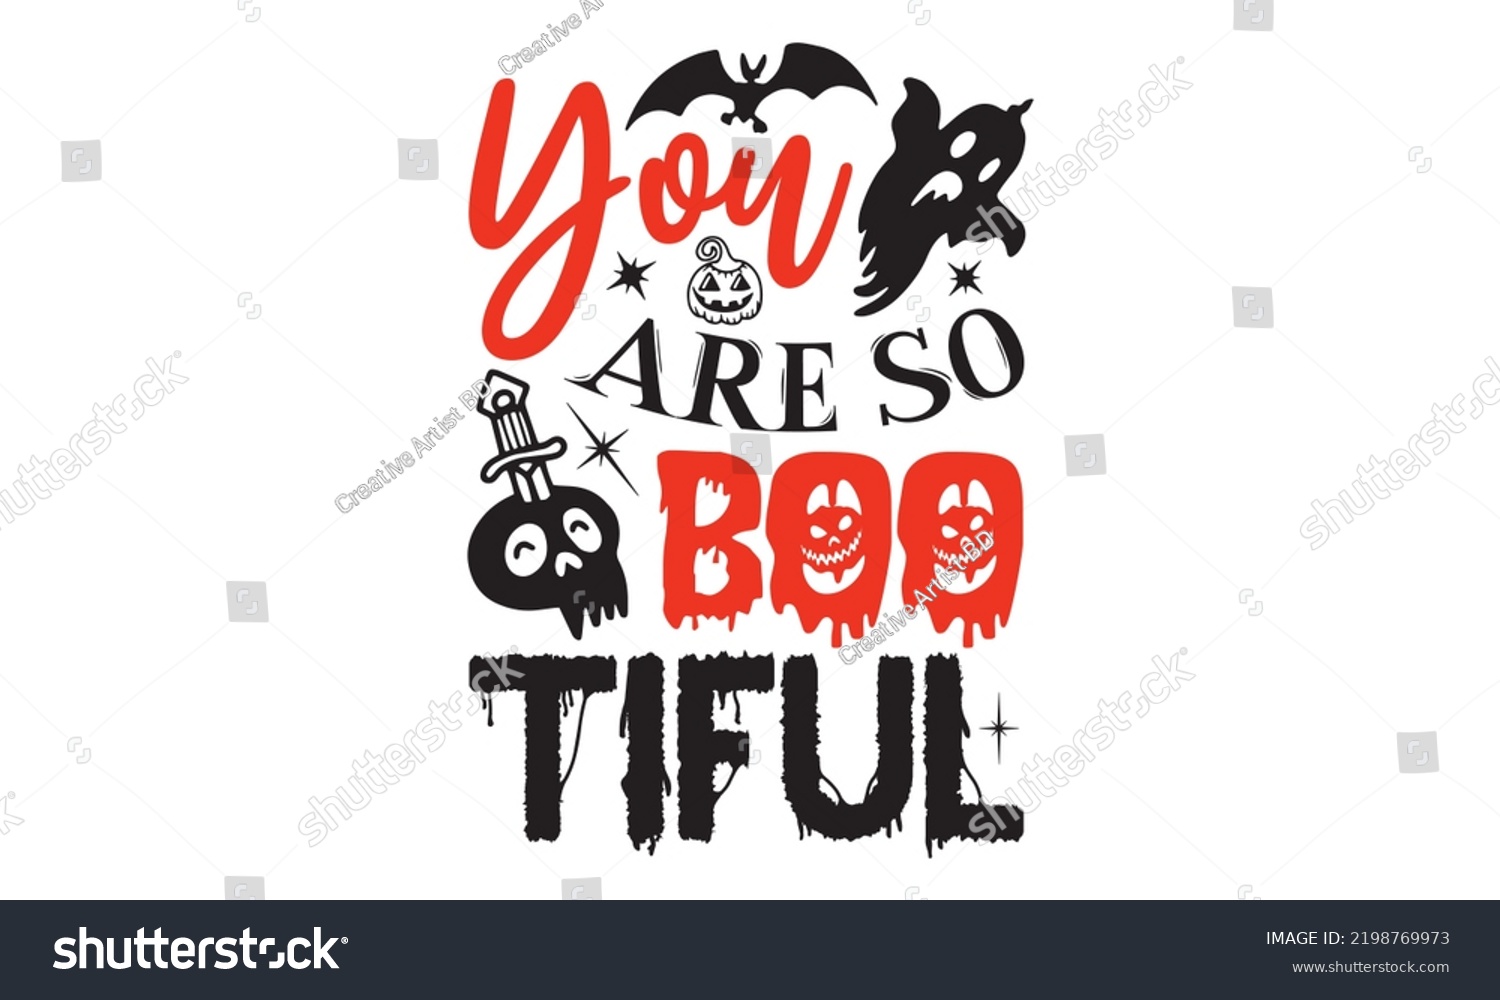 SVG of You are so boo-tiful - Halloween T shirt Design, Hand drawn lettering and calligraphy, Svg Files for Cricut, Instant Download, Illustration for prints on bags, posters svg